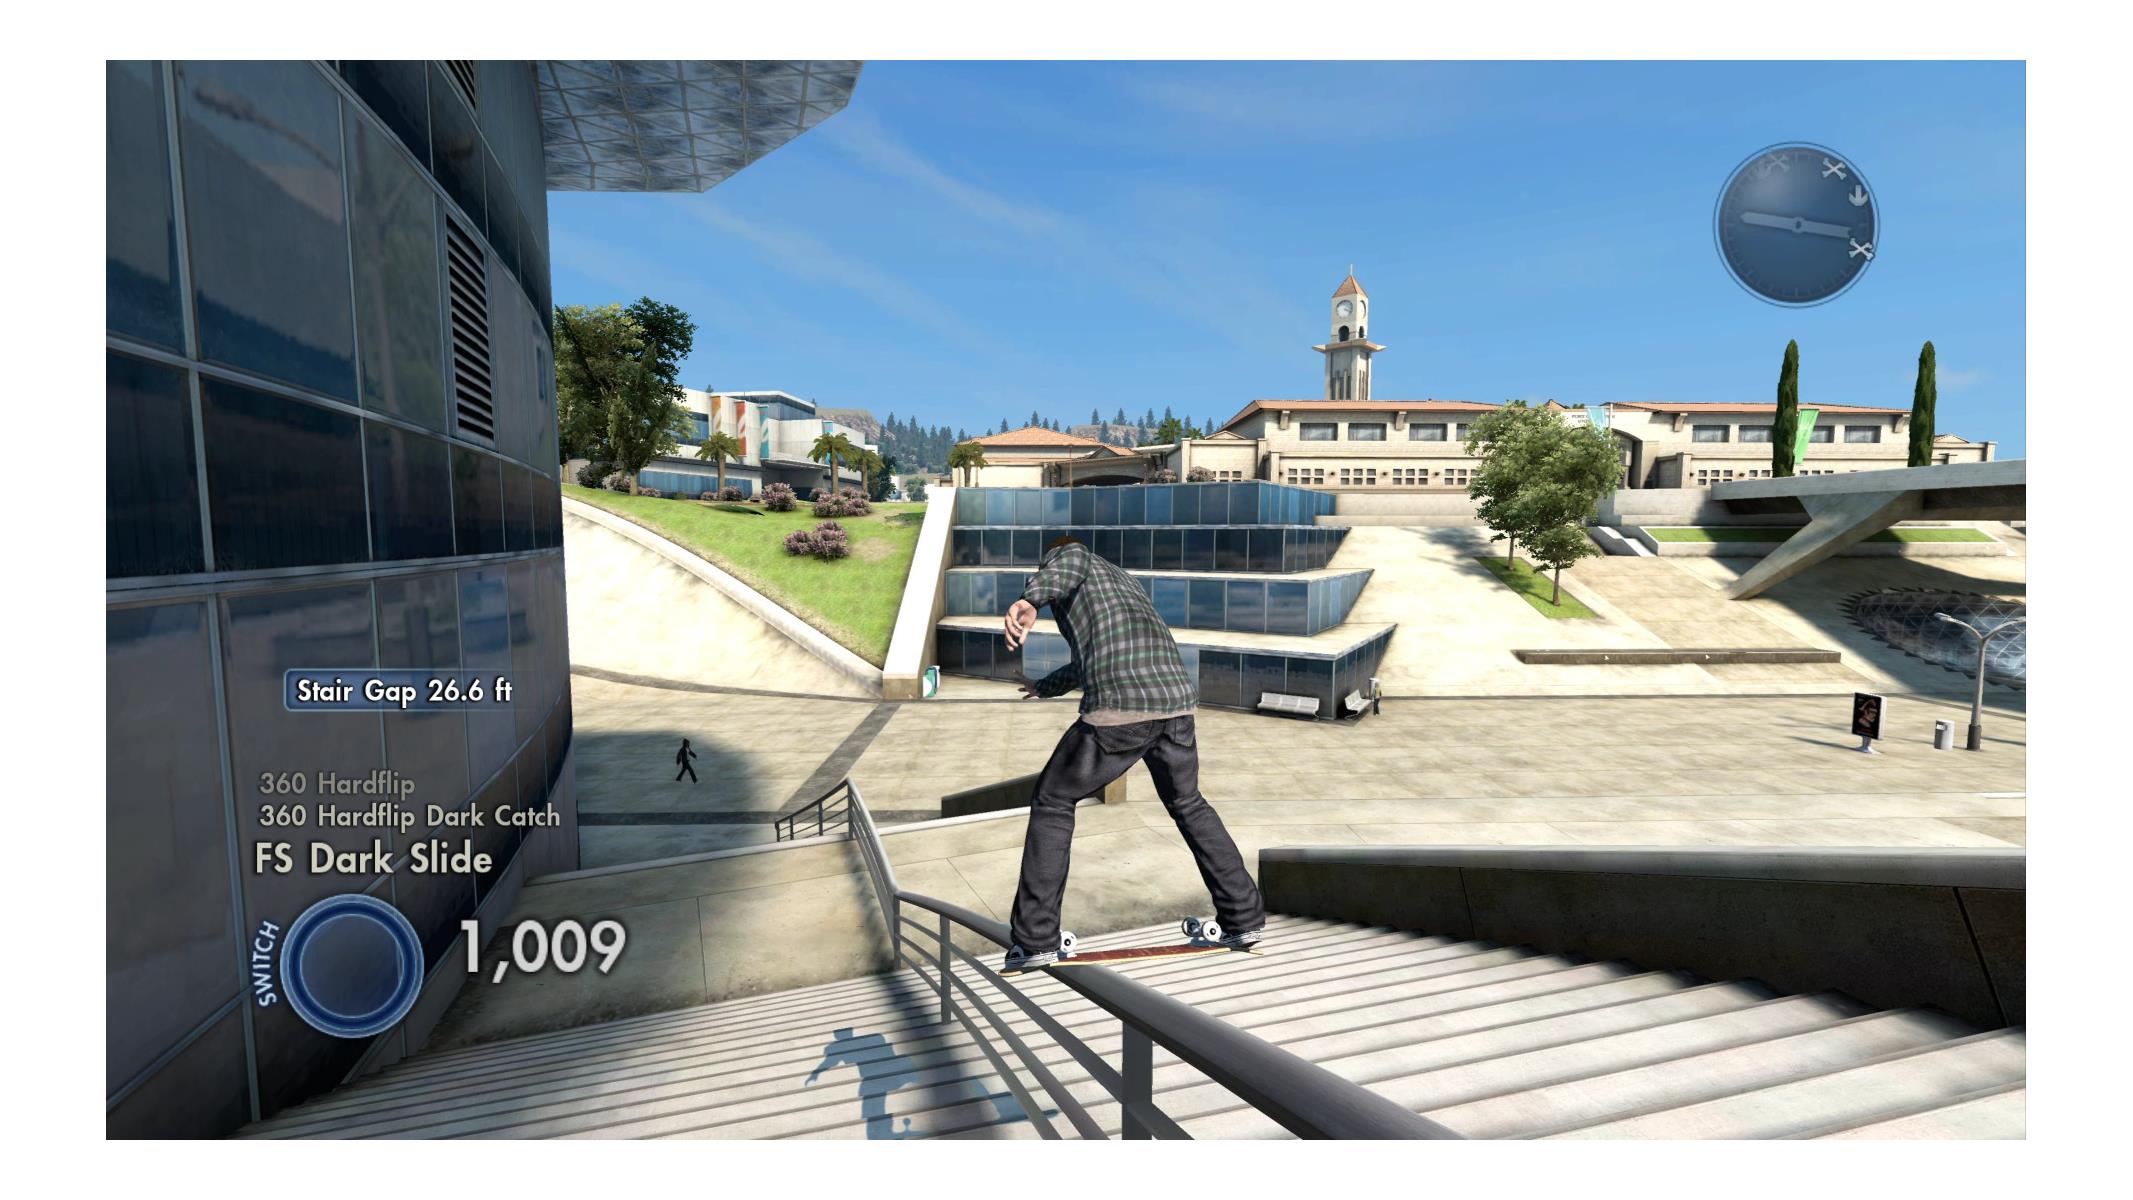 SKATE 3 is fully Playable on PC! (RPCS3 - Enhanced Resolution